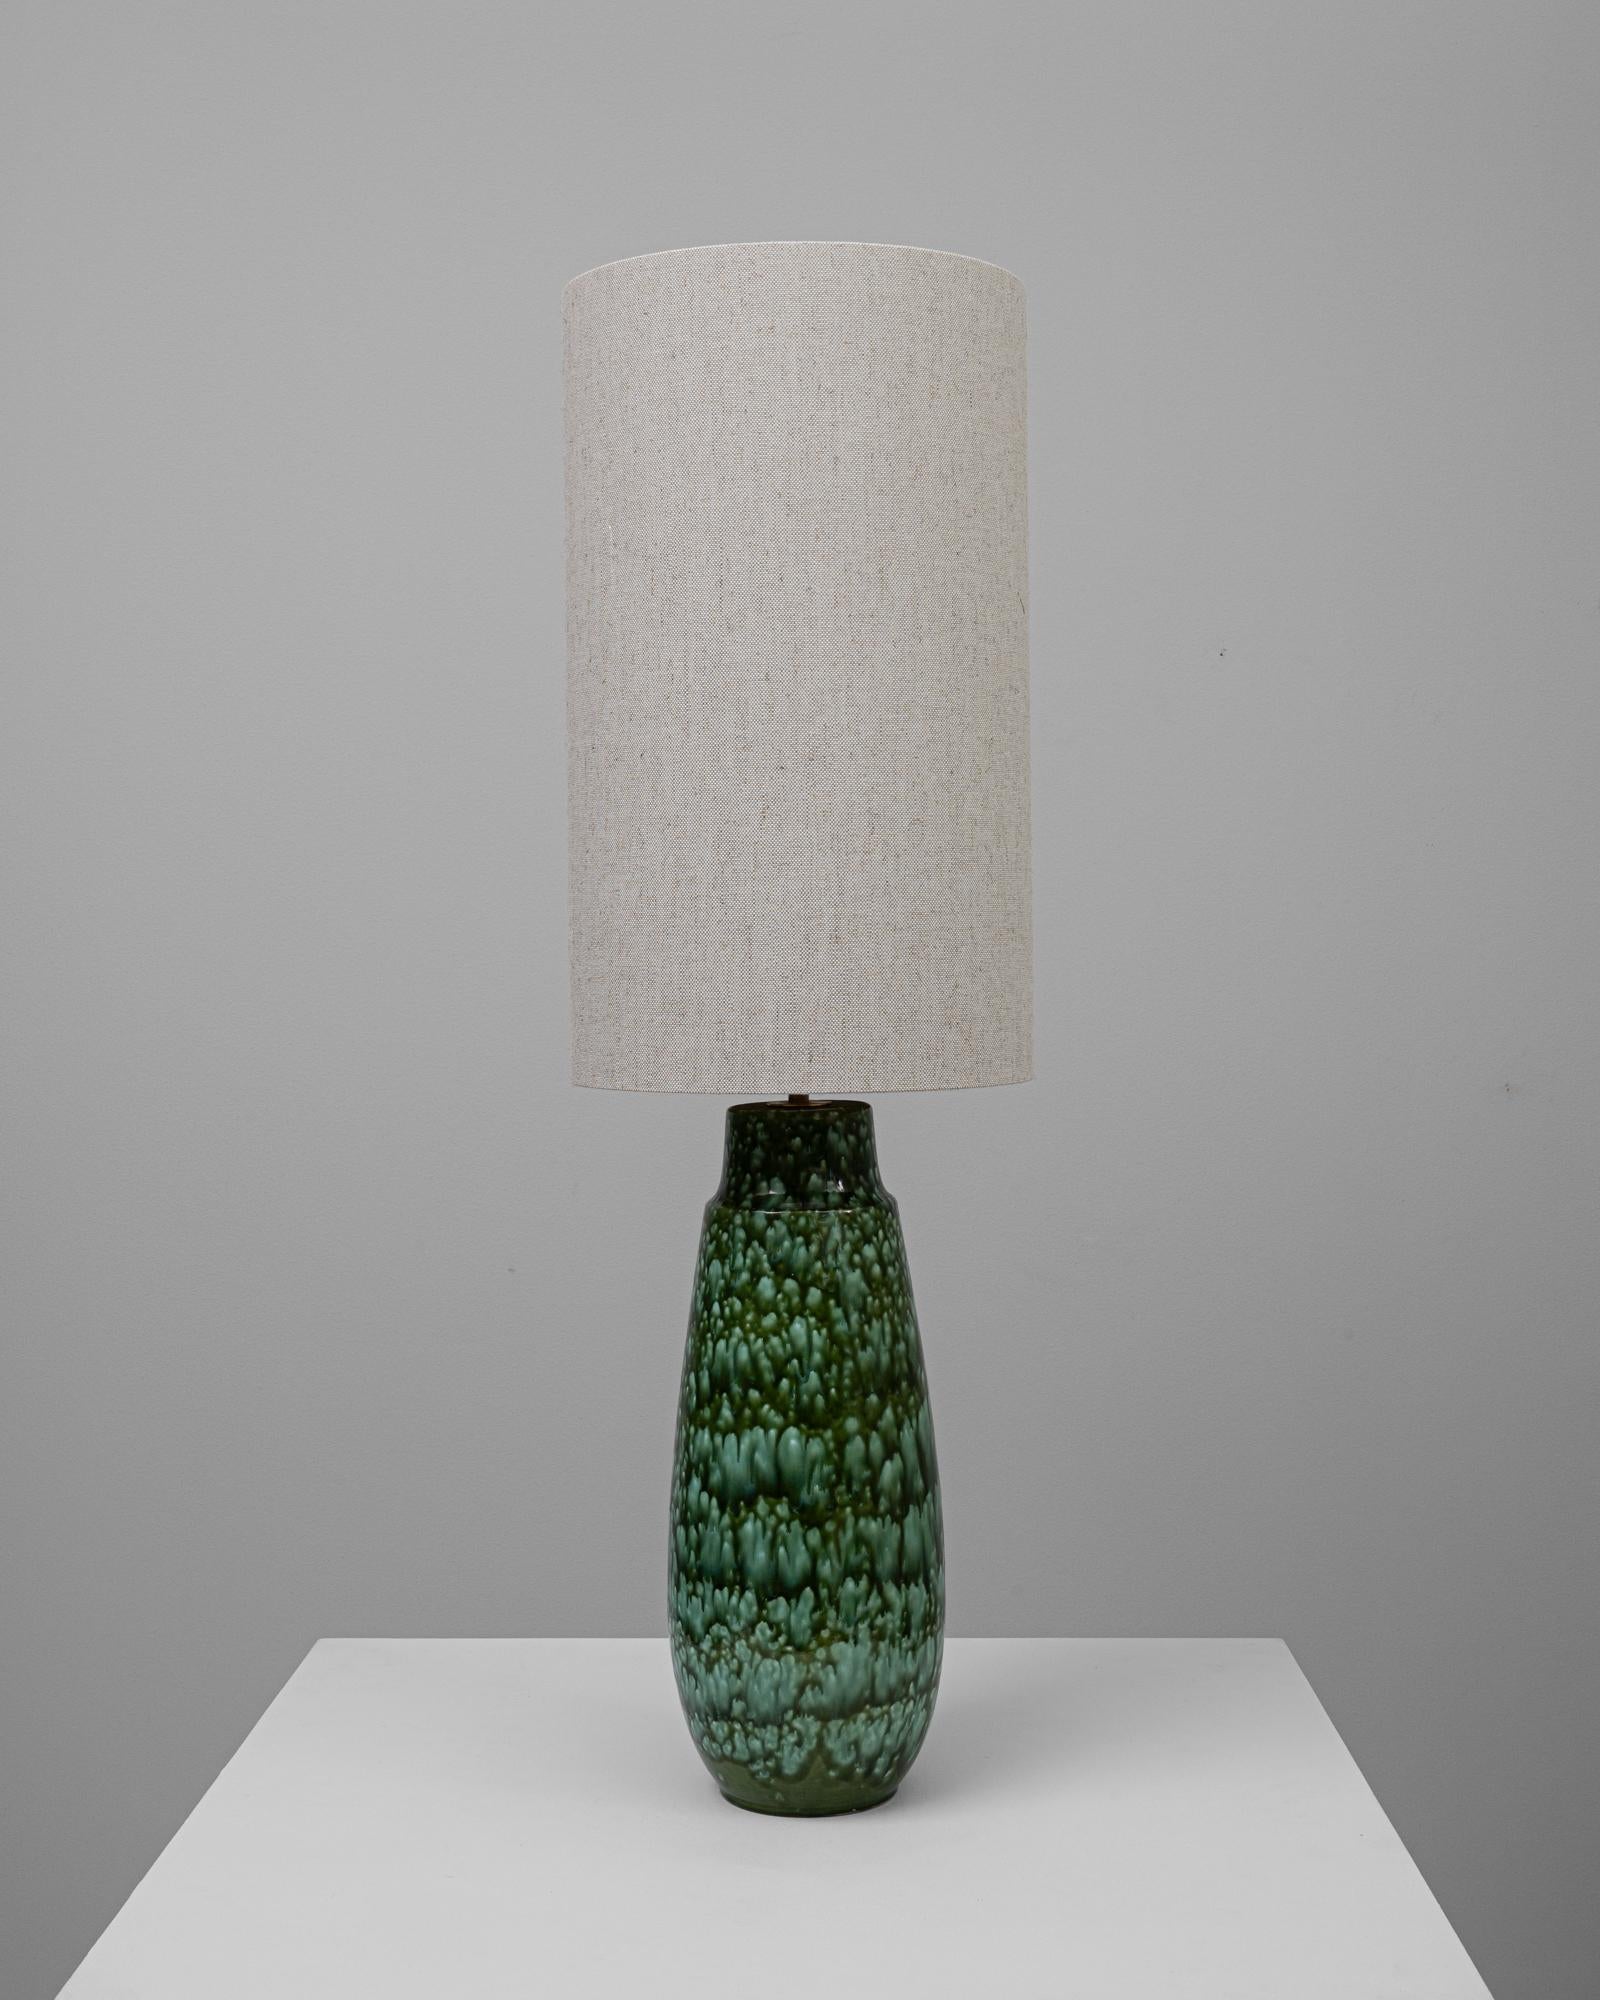 This 20th Century German Ceramic Table Lamp features a base that takes inspiration from the lush textures of the natural world. Its vibrant green glaze, with a unique raised pattern, resembles the scales of a pine cone or the lush foliage of a dense